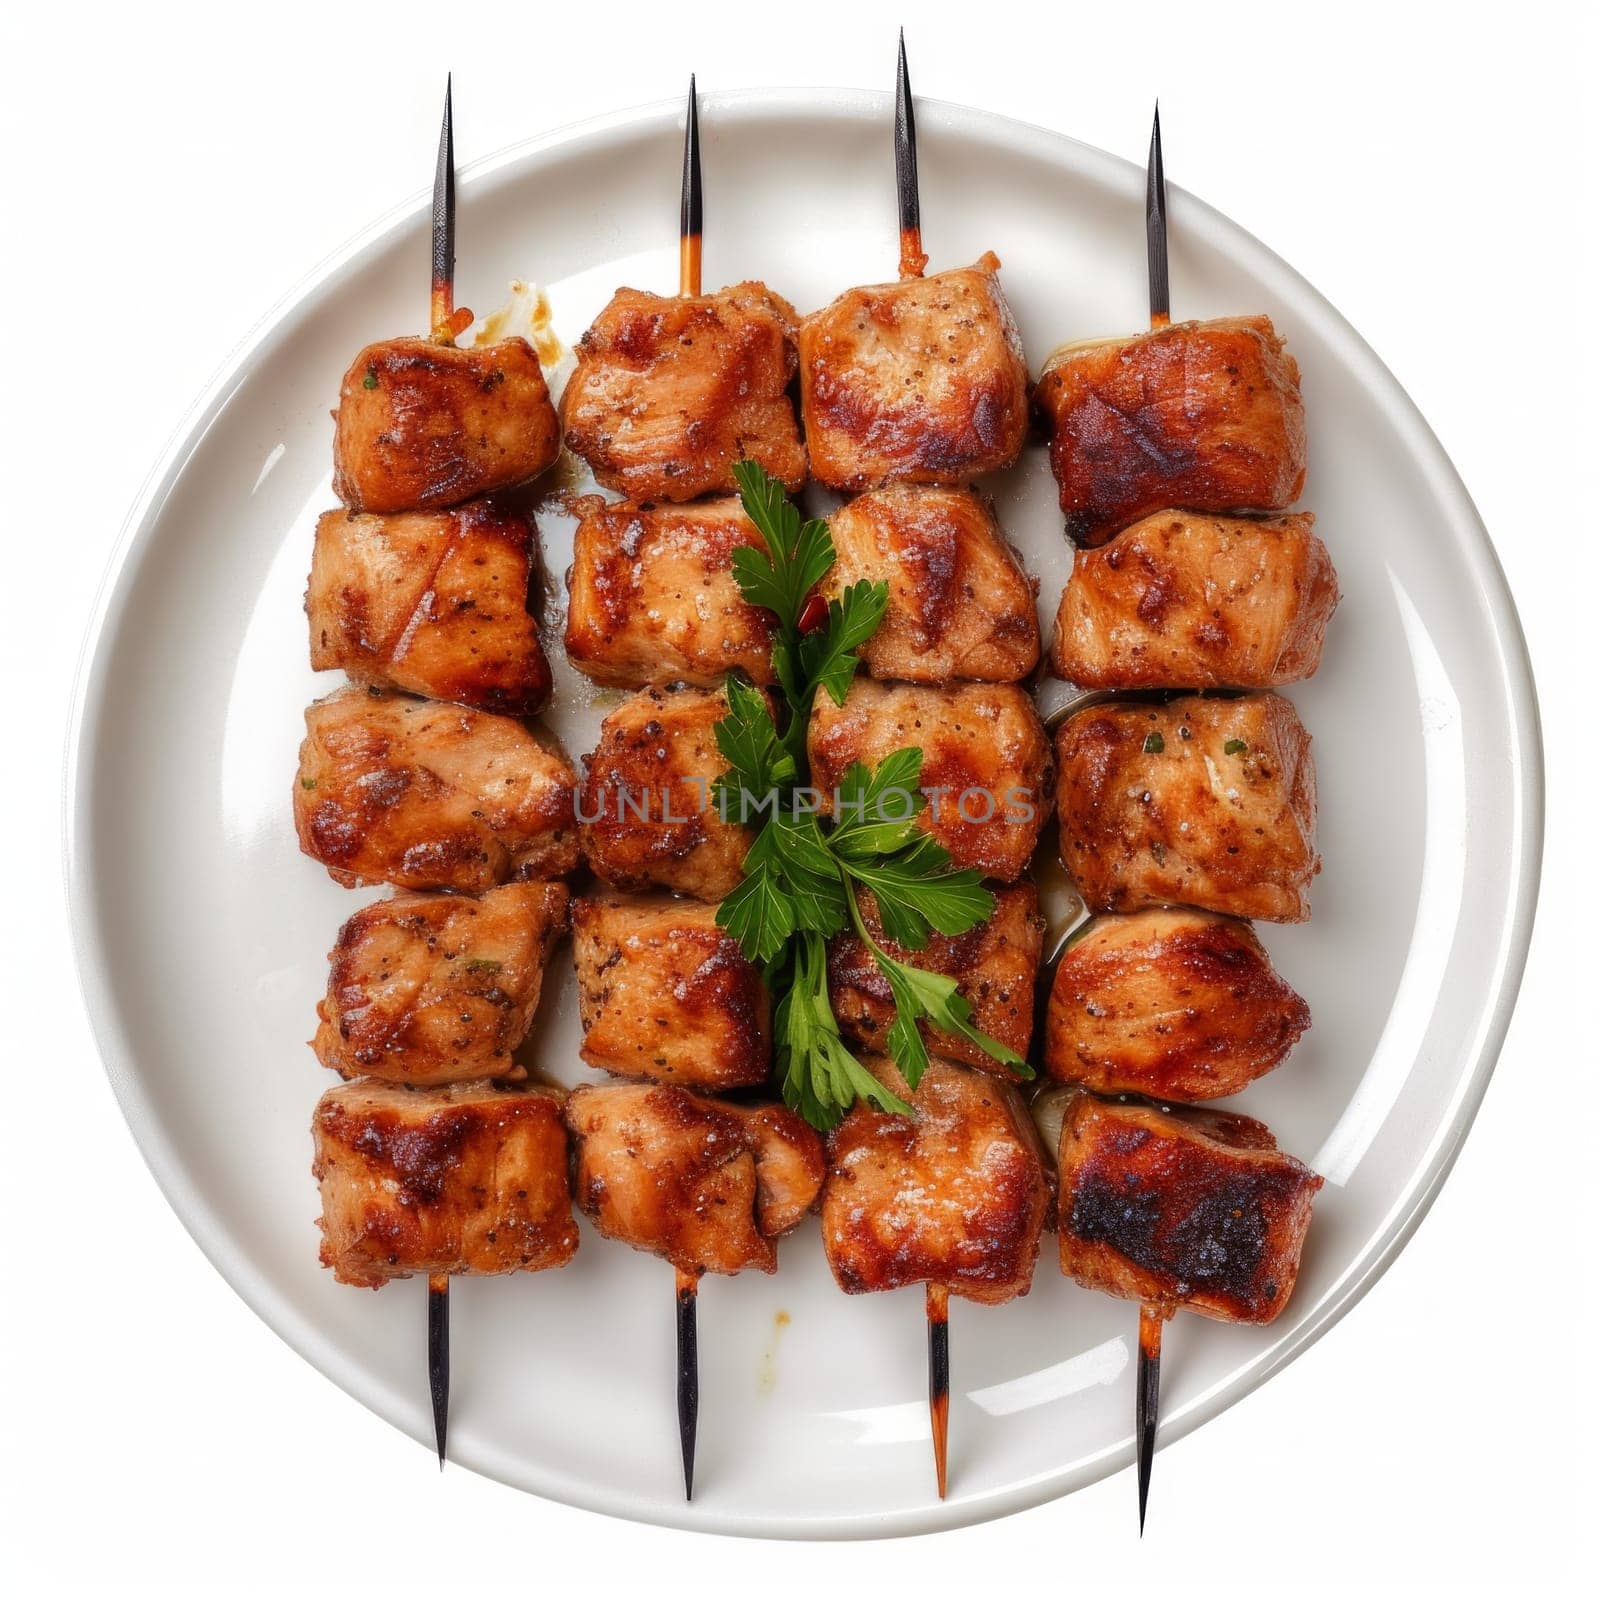 Top view of marinated and grilled chicken meat skewers isolated on white background.